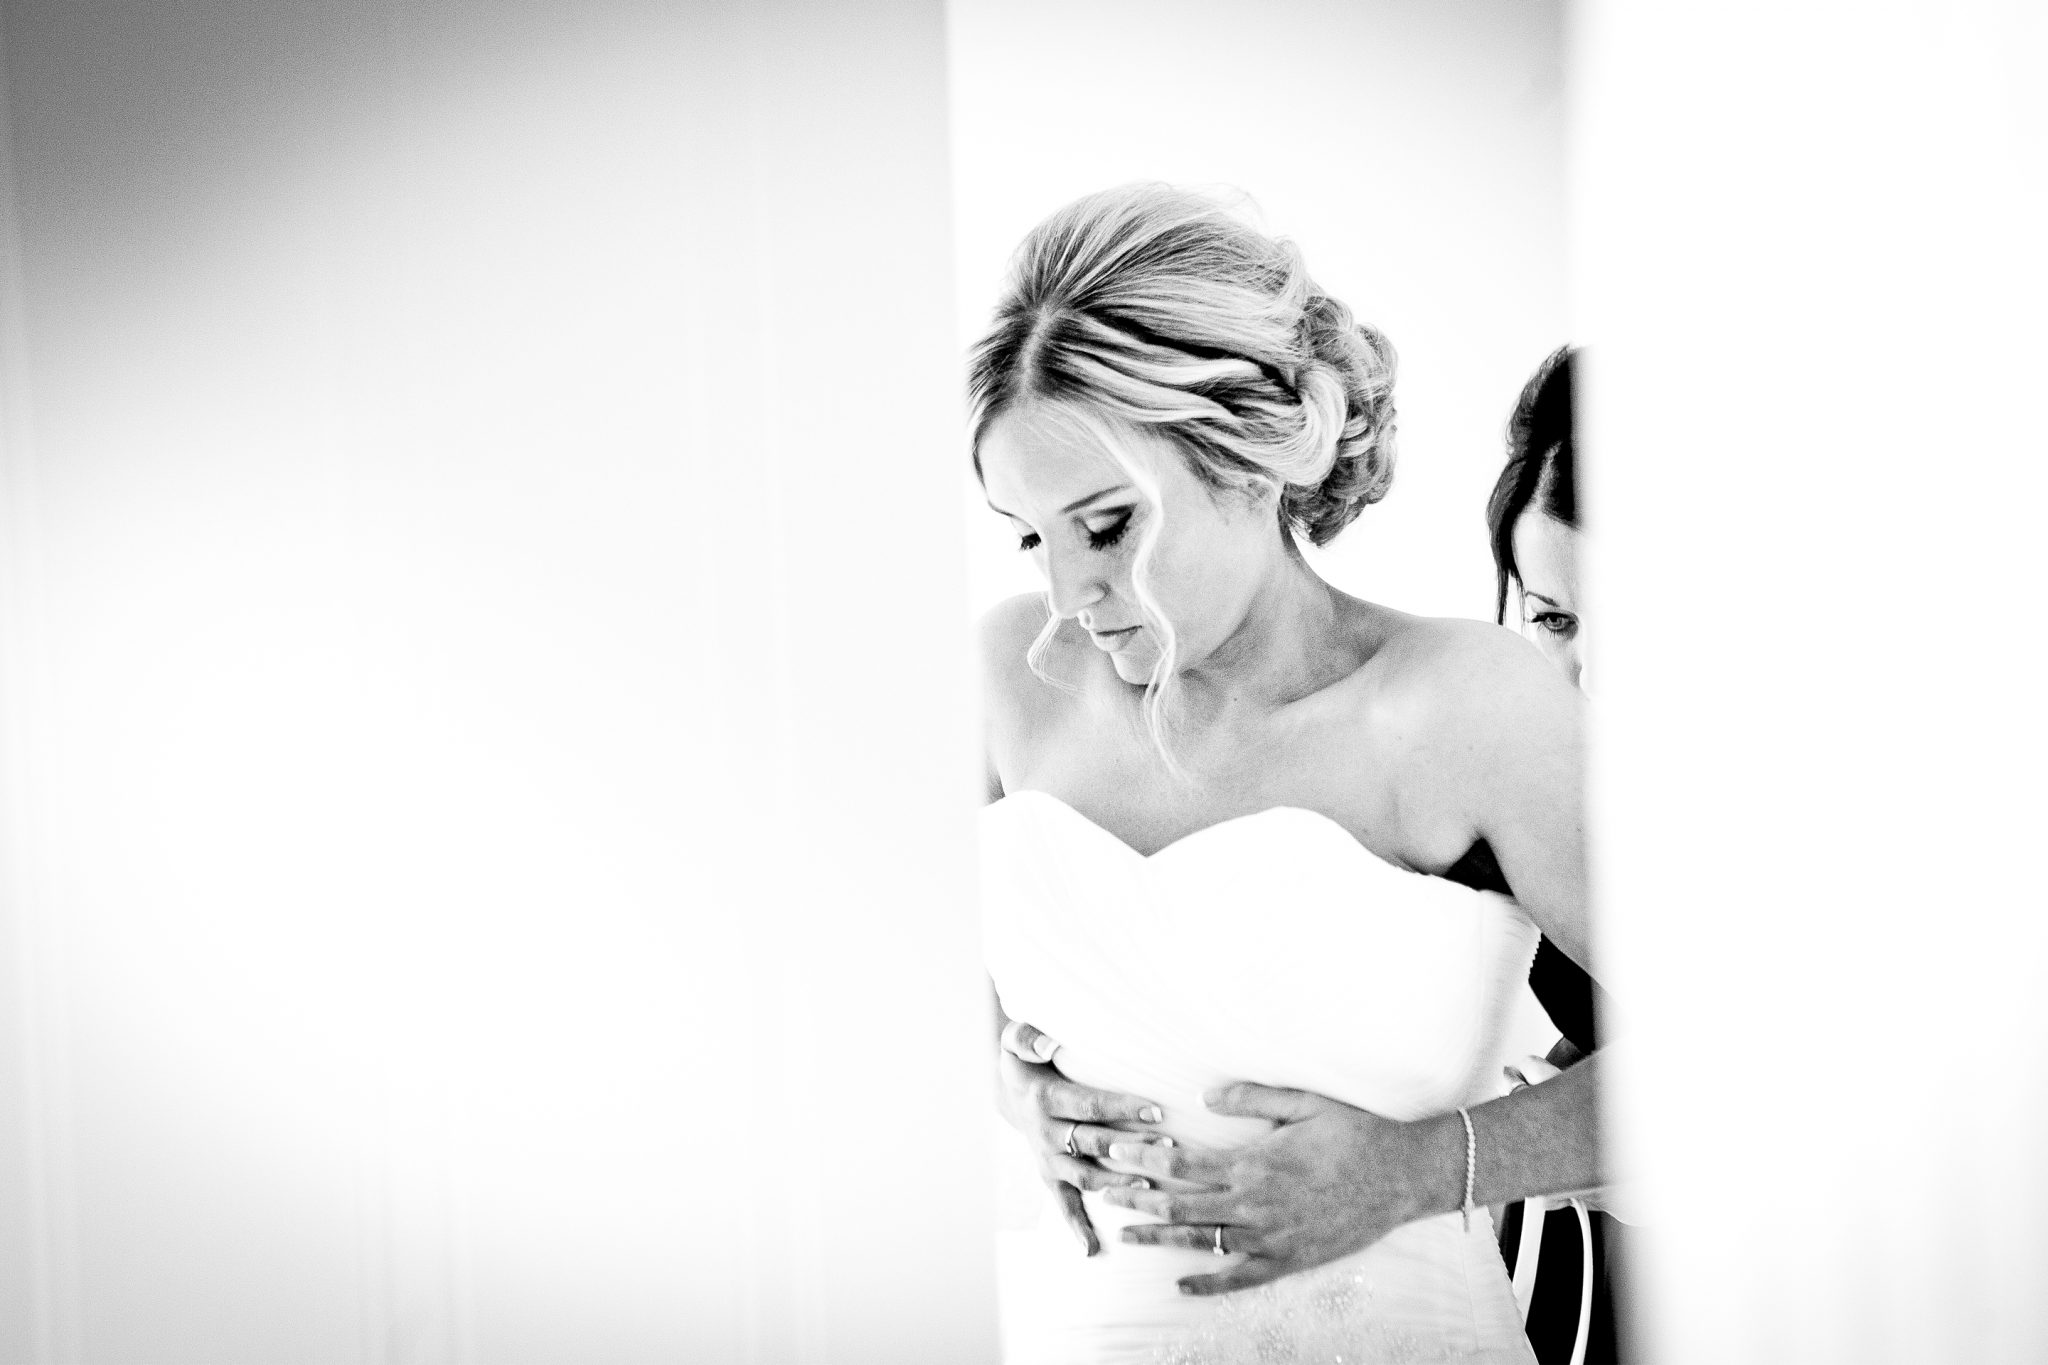 Cheshire Wedding Photography. The bride getting ready before the ceremony